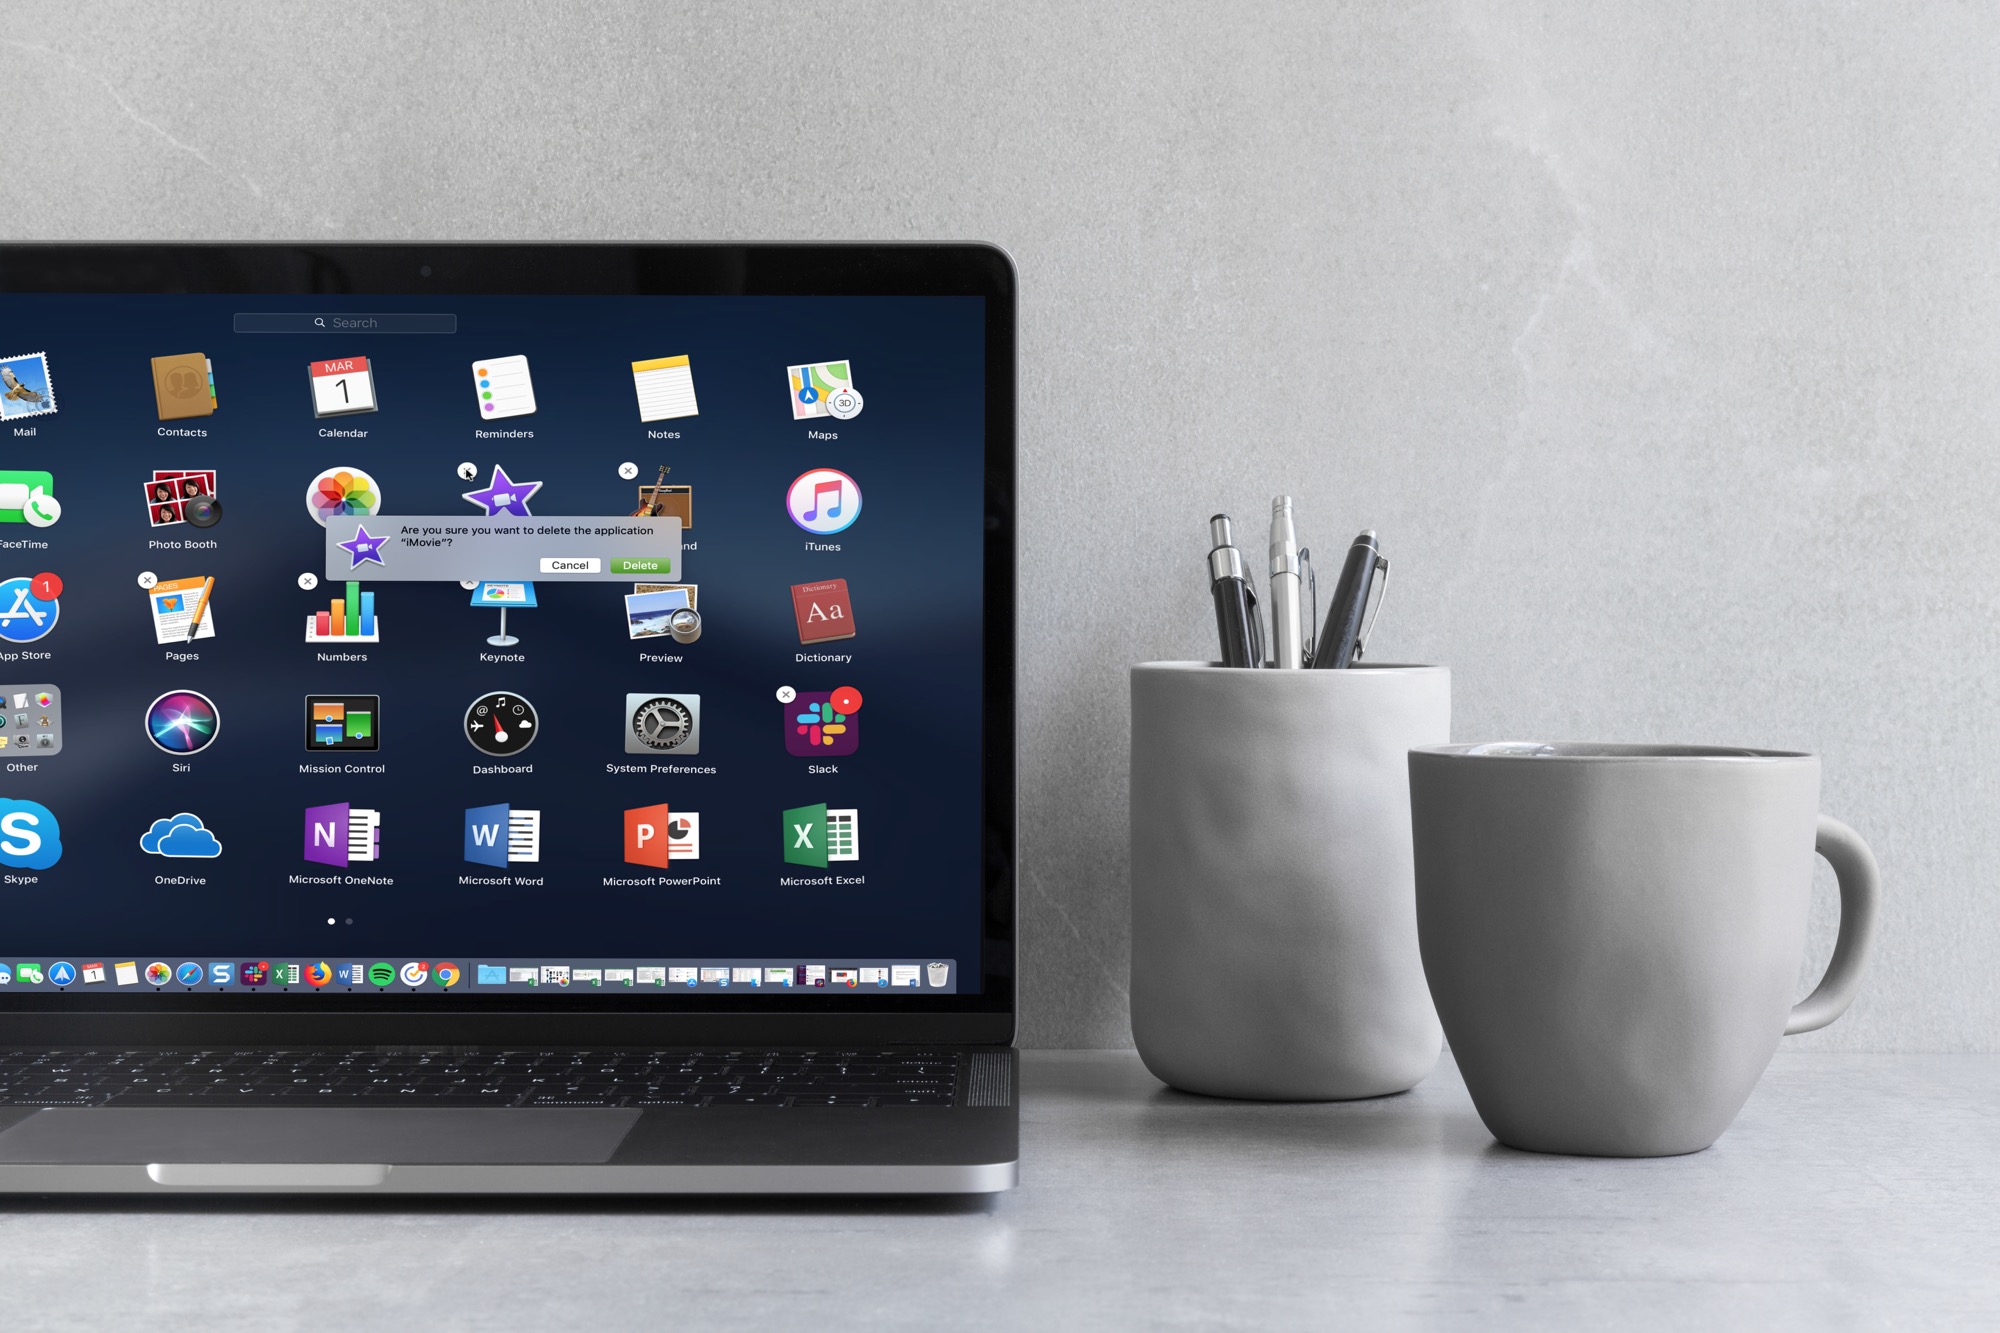 How to delete apps from dock on mac